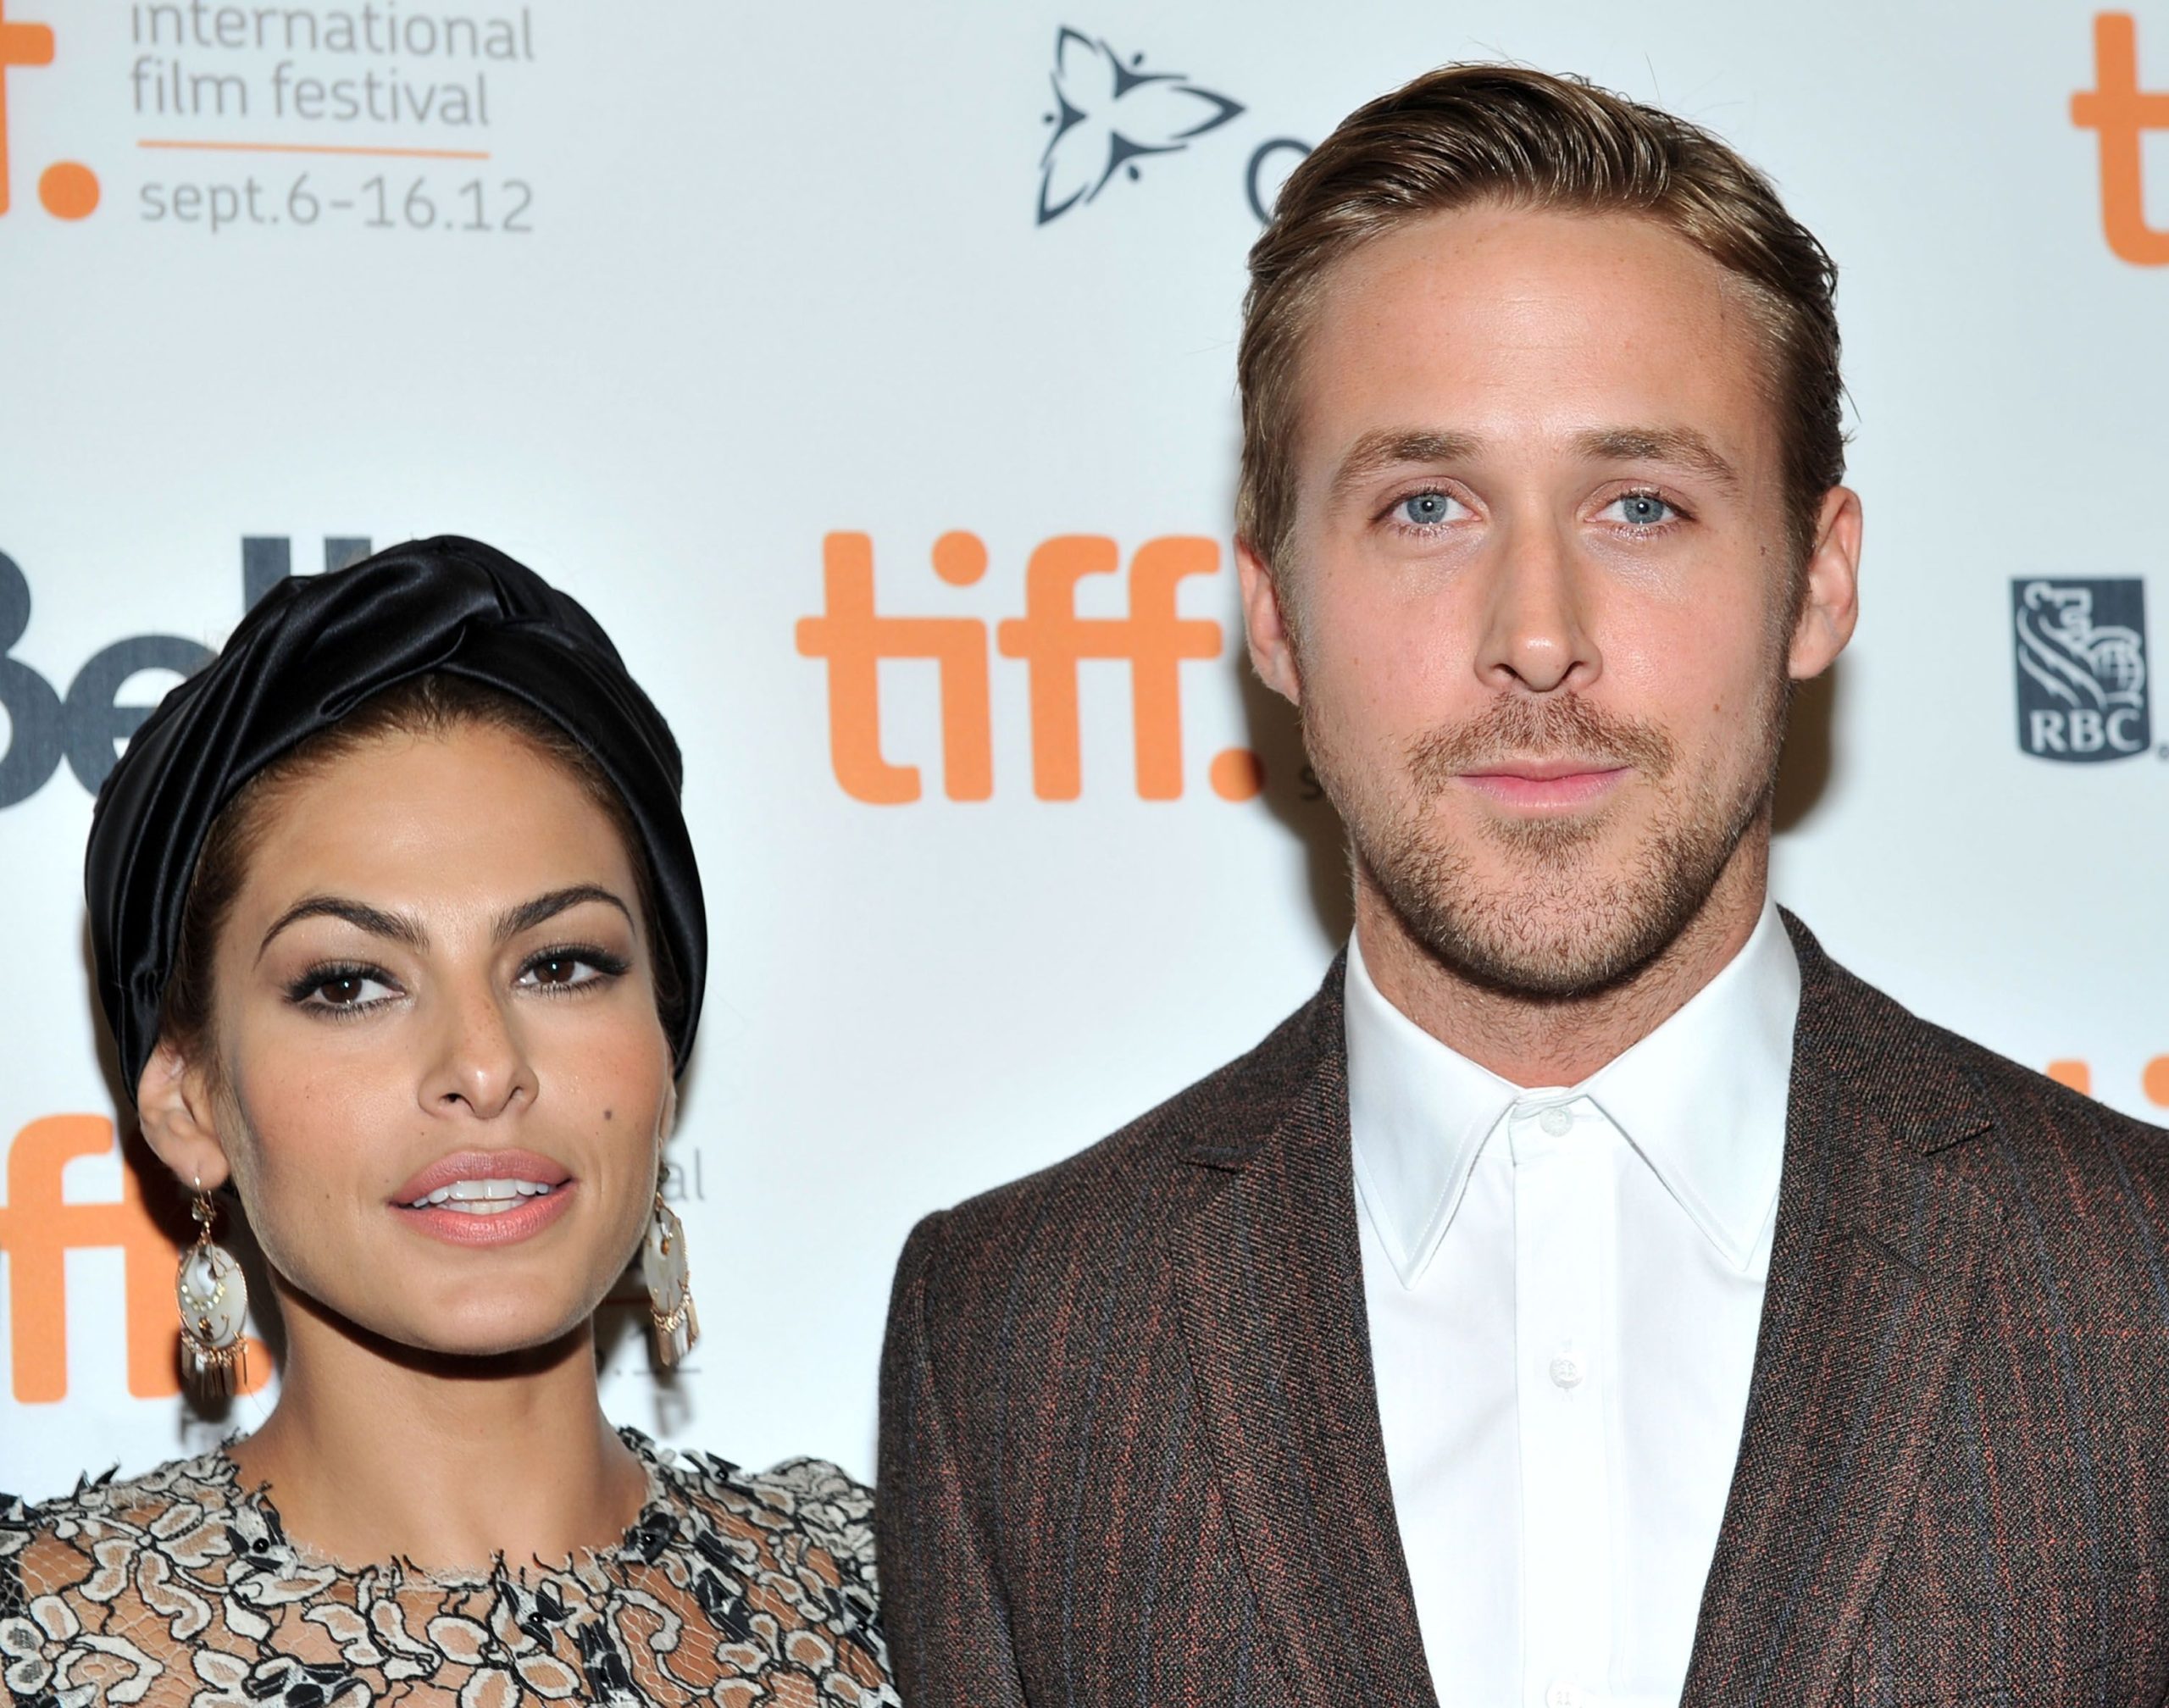 actors-eva-mendes-and-ryan-gosling-attend-the-place-beyond-news-photo-1586634167-6997252